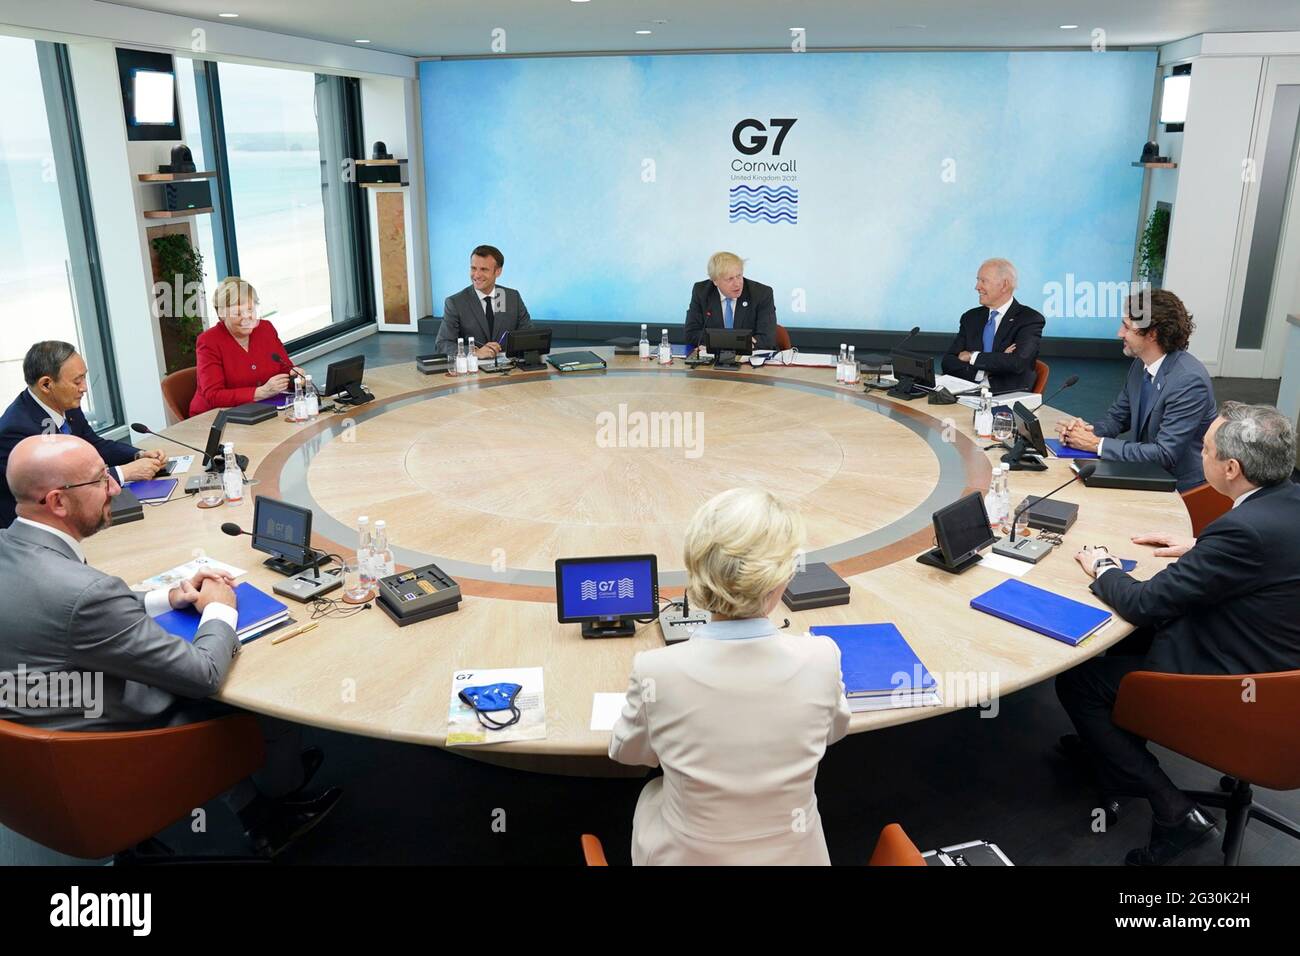 British Prime Minister Boris Johnson, center, hosts a leaders session of the G7 Summit at the Carbis Bay Hotel, June 11, 2021 in Carbis Bay, Cornwall, United Kingdom. Sitting from left to right are: European Council President Charles Michel, Japanese Prime Minister Yoshihide Suga, German Chancellor Angela Merkel, French President Emmanuel Macron, British Prime Minister Boris Johnson, U.S President Joe Biden, Canadian Prime Minister Justin Trudeau, Italian Prime Minister Mario Draghi, and European Commission President Ursula von der Leyen. Stock Photo